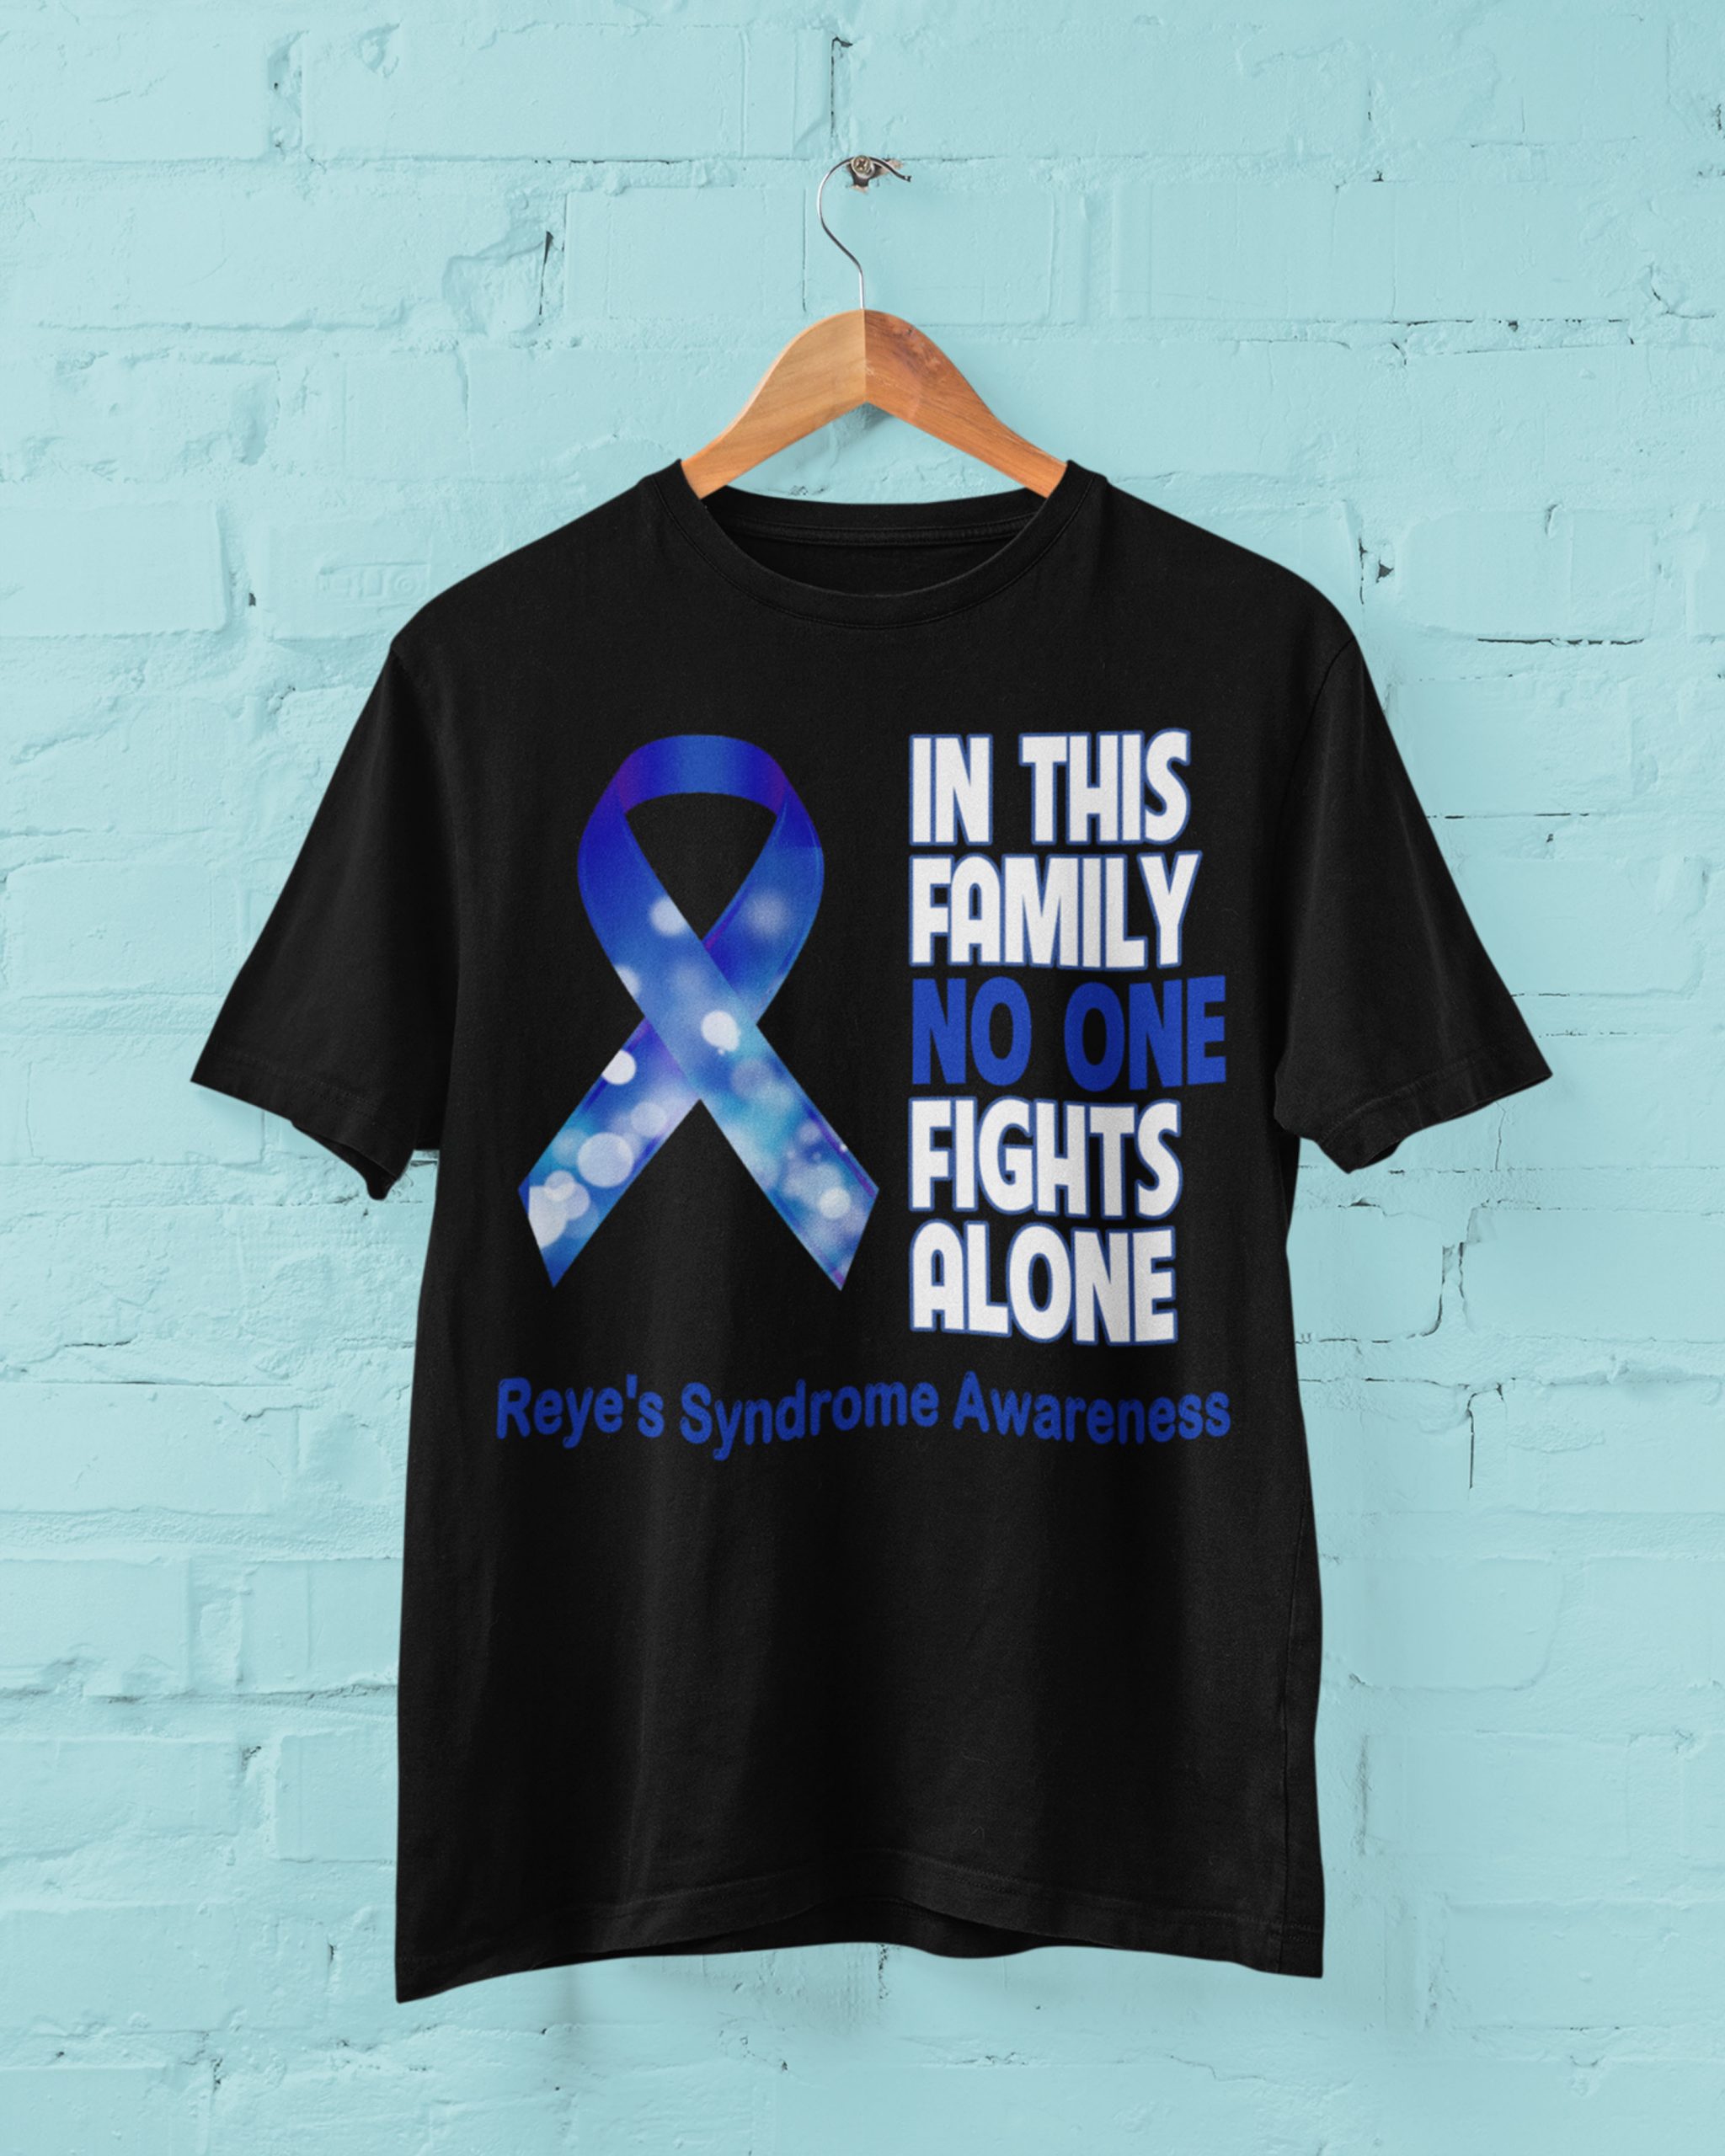 In This Family No One Fight Alone - Reye's Syndrome Awareness Unisex T-Shirt, Sweatshirt, Hoodie